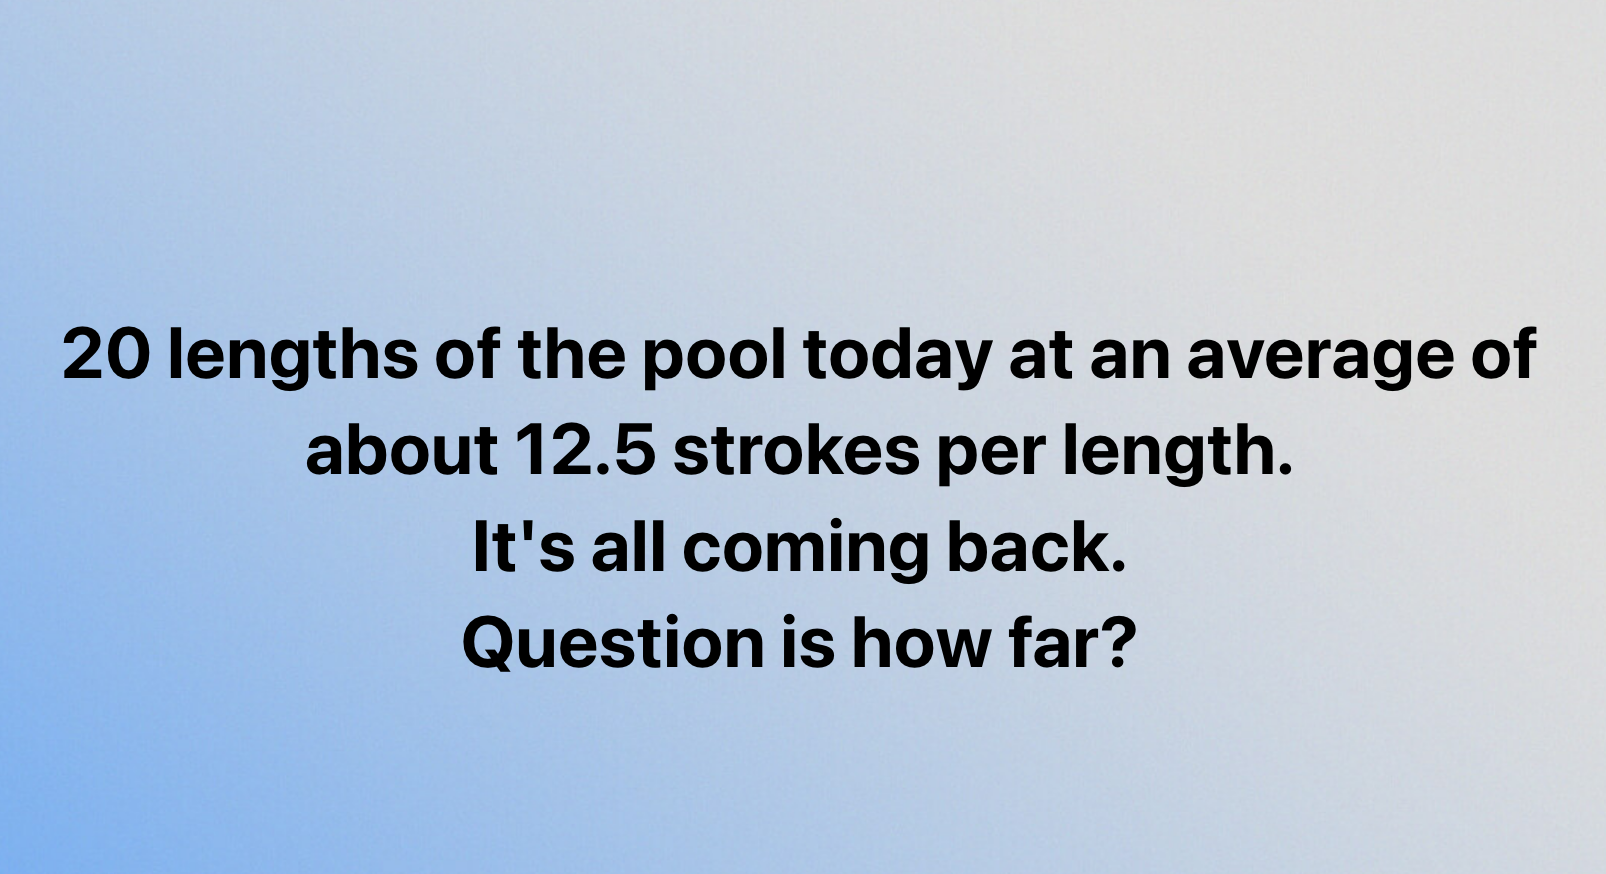 20 lengths of the pool today at an average of
about 12.5 strokes per length.
It's all coming back.
Question is how far?